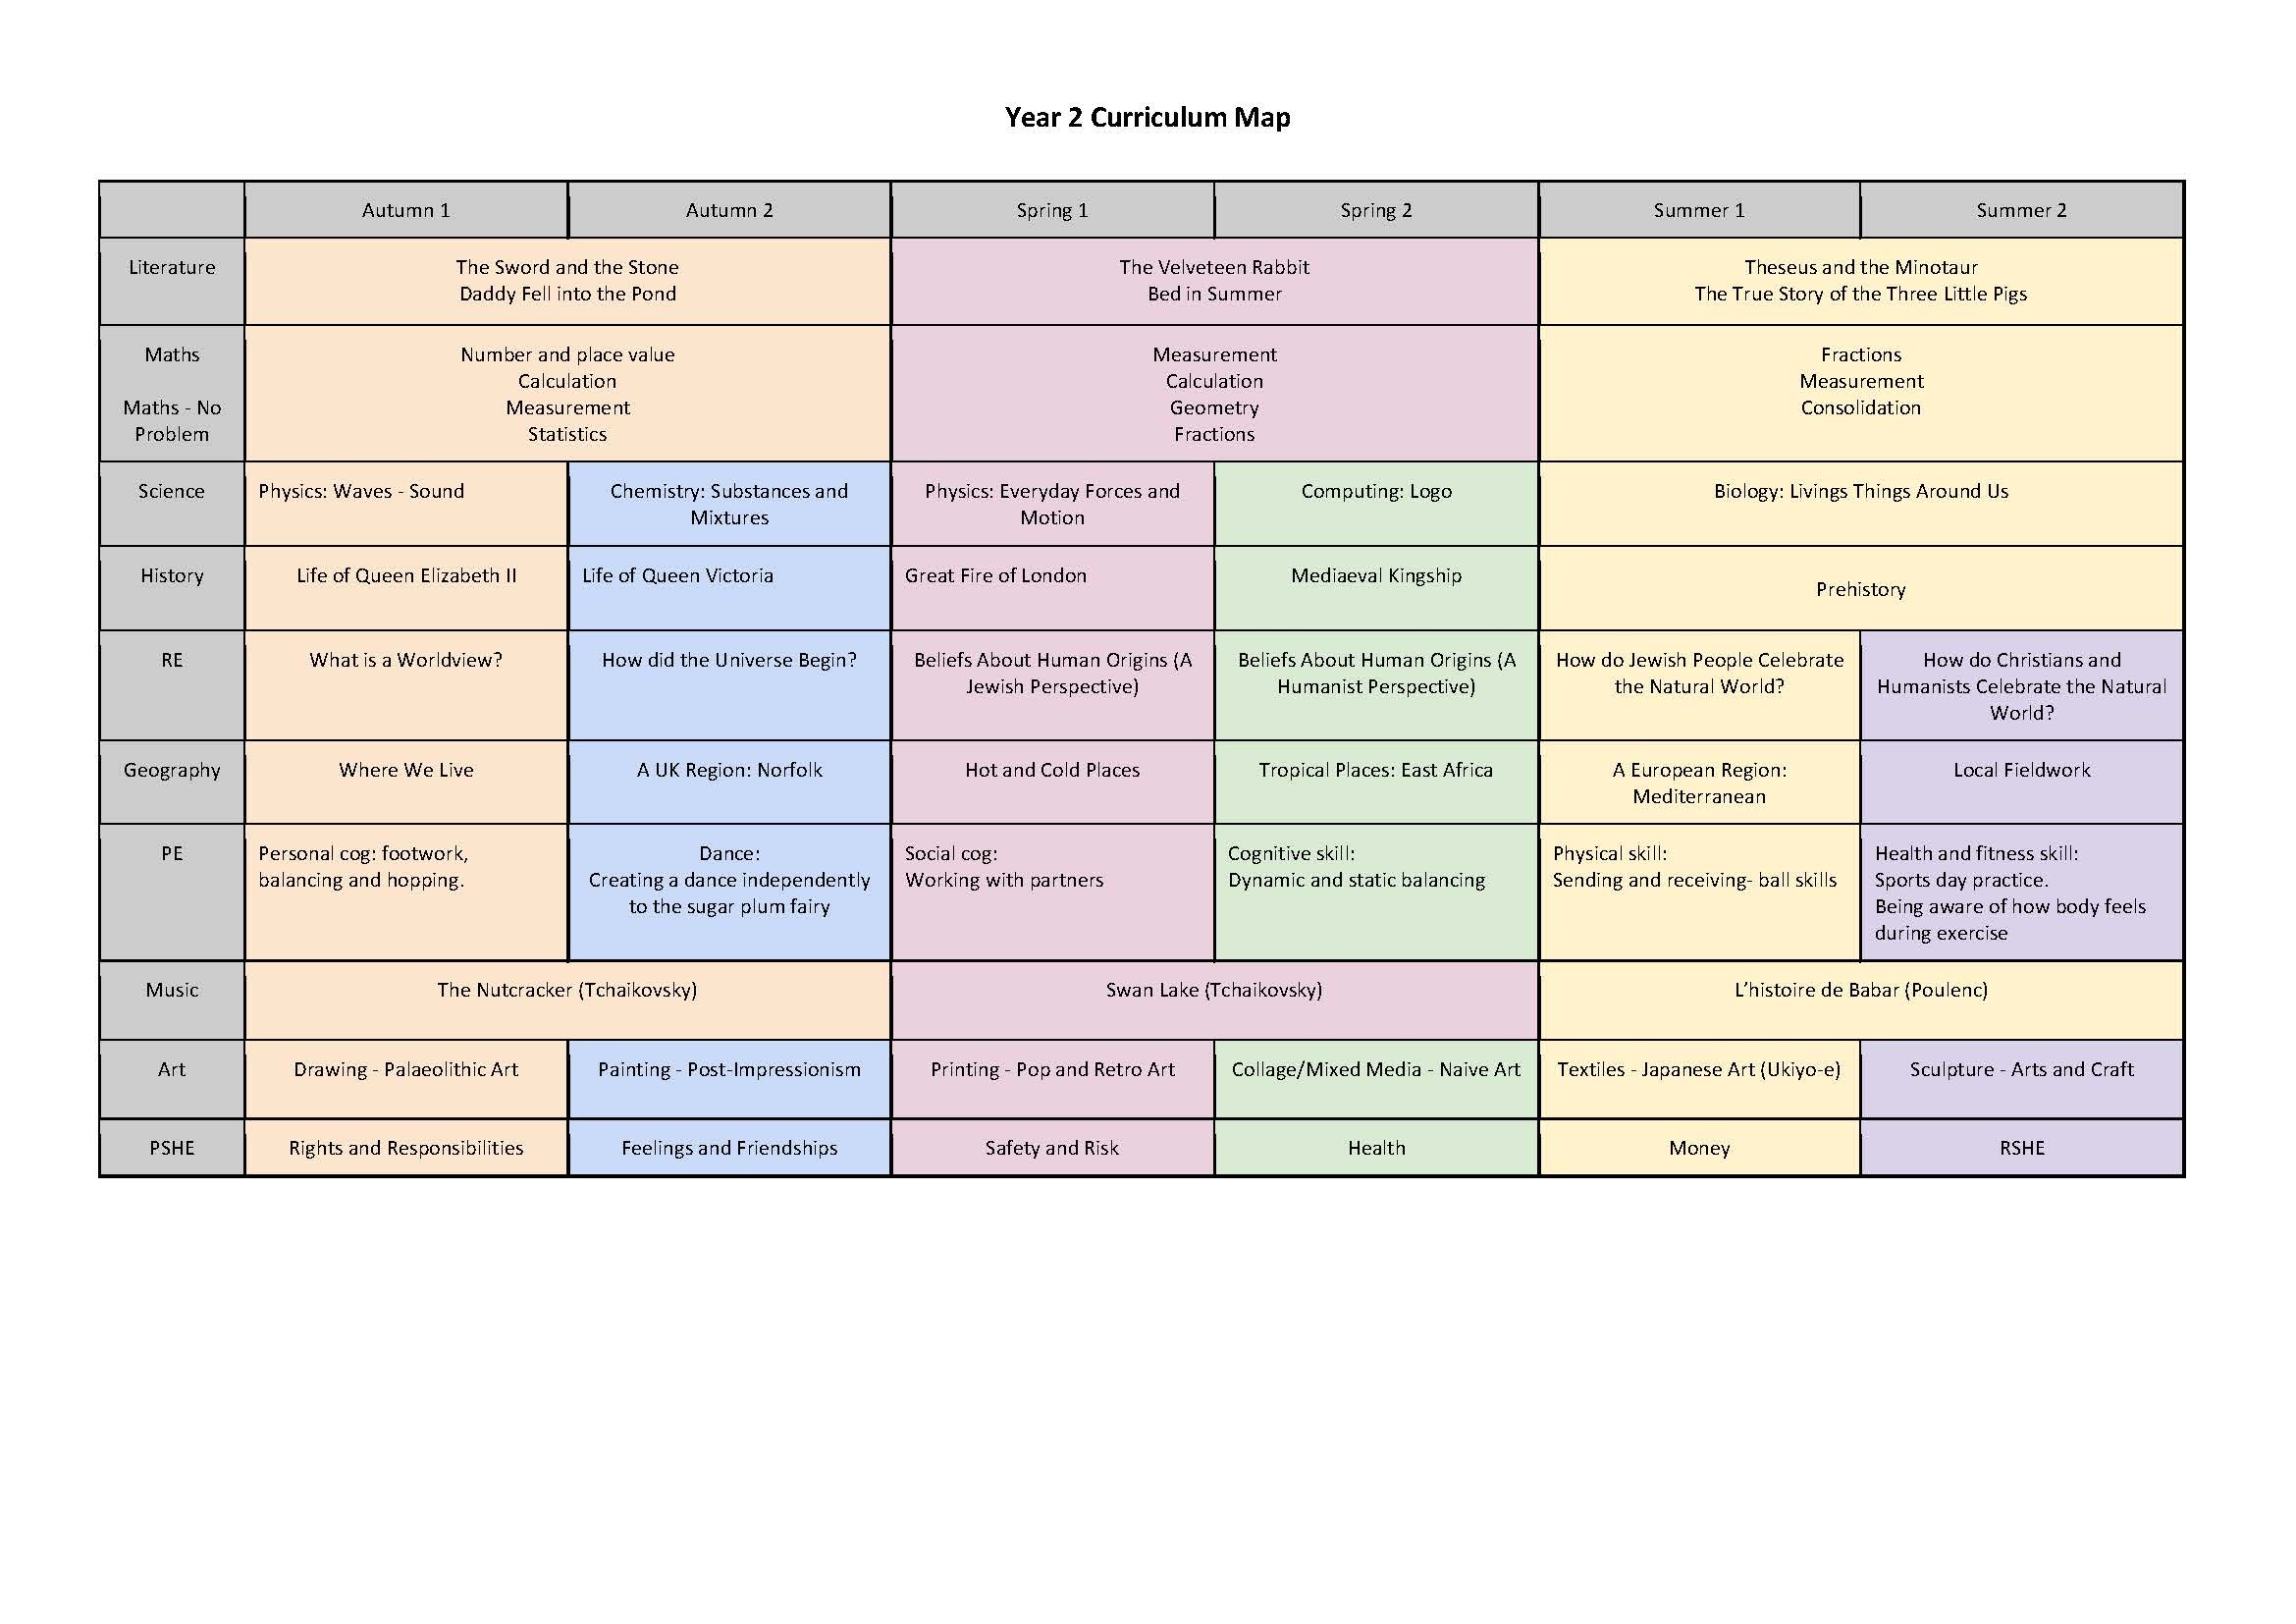 Year 2 Curriculum Overview